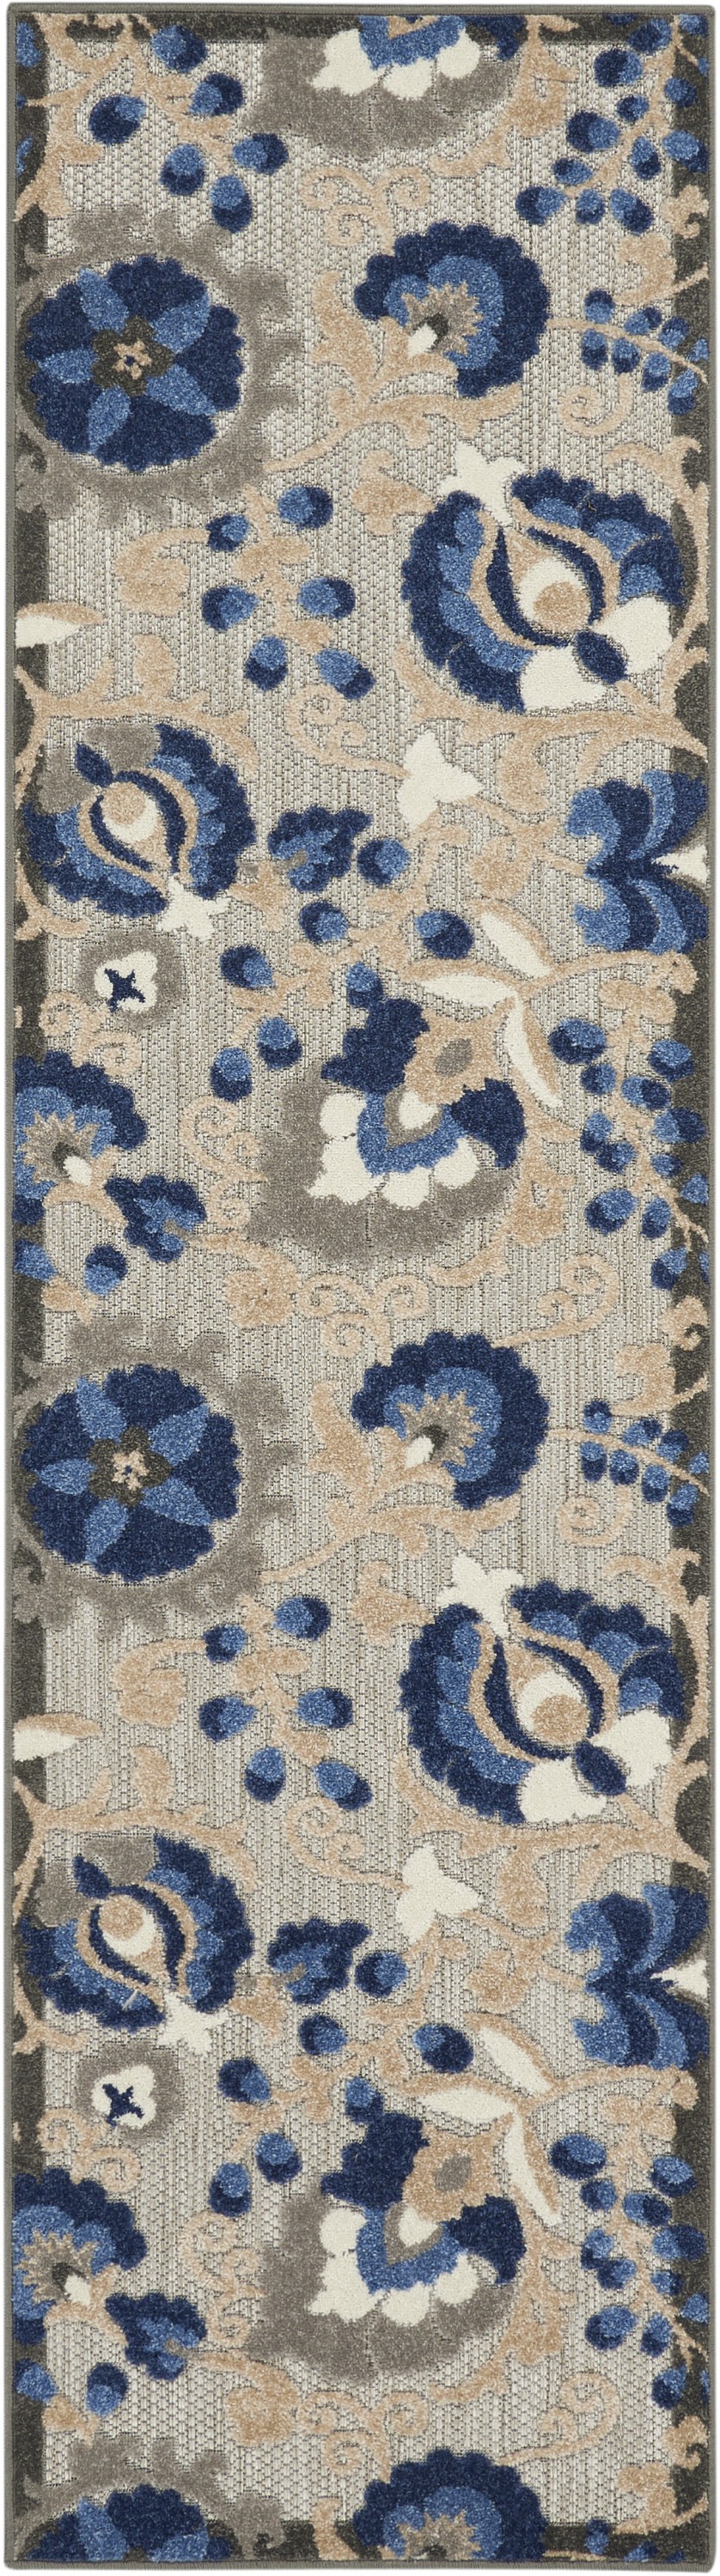 2’ x 12’ Natural and Blue Indoor Outdoor Runner Rug-384855-1